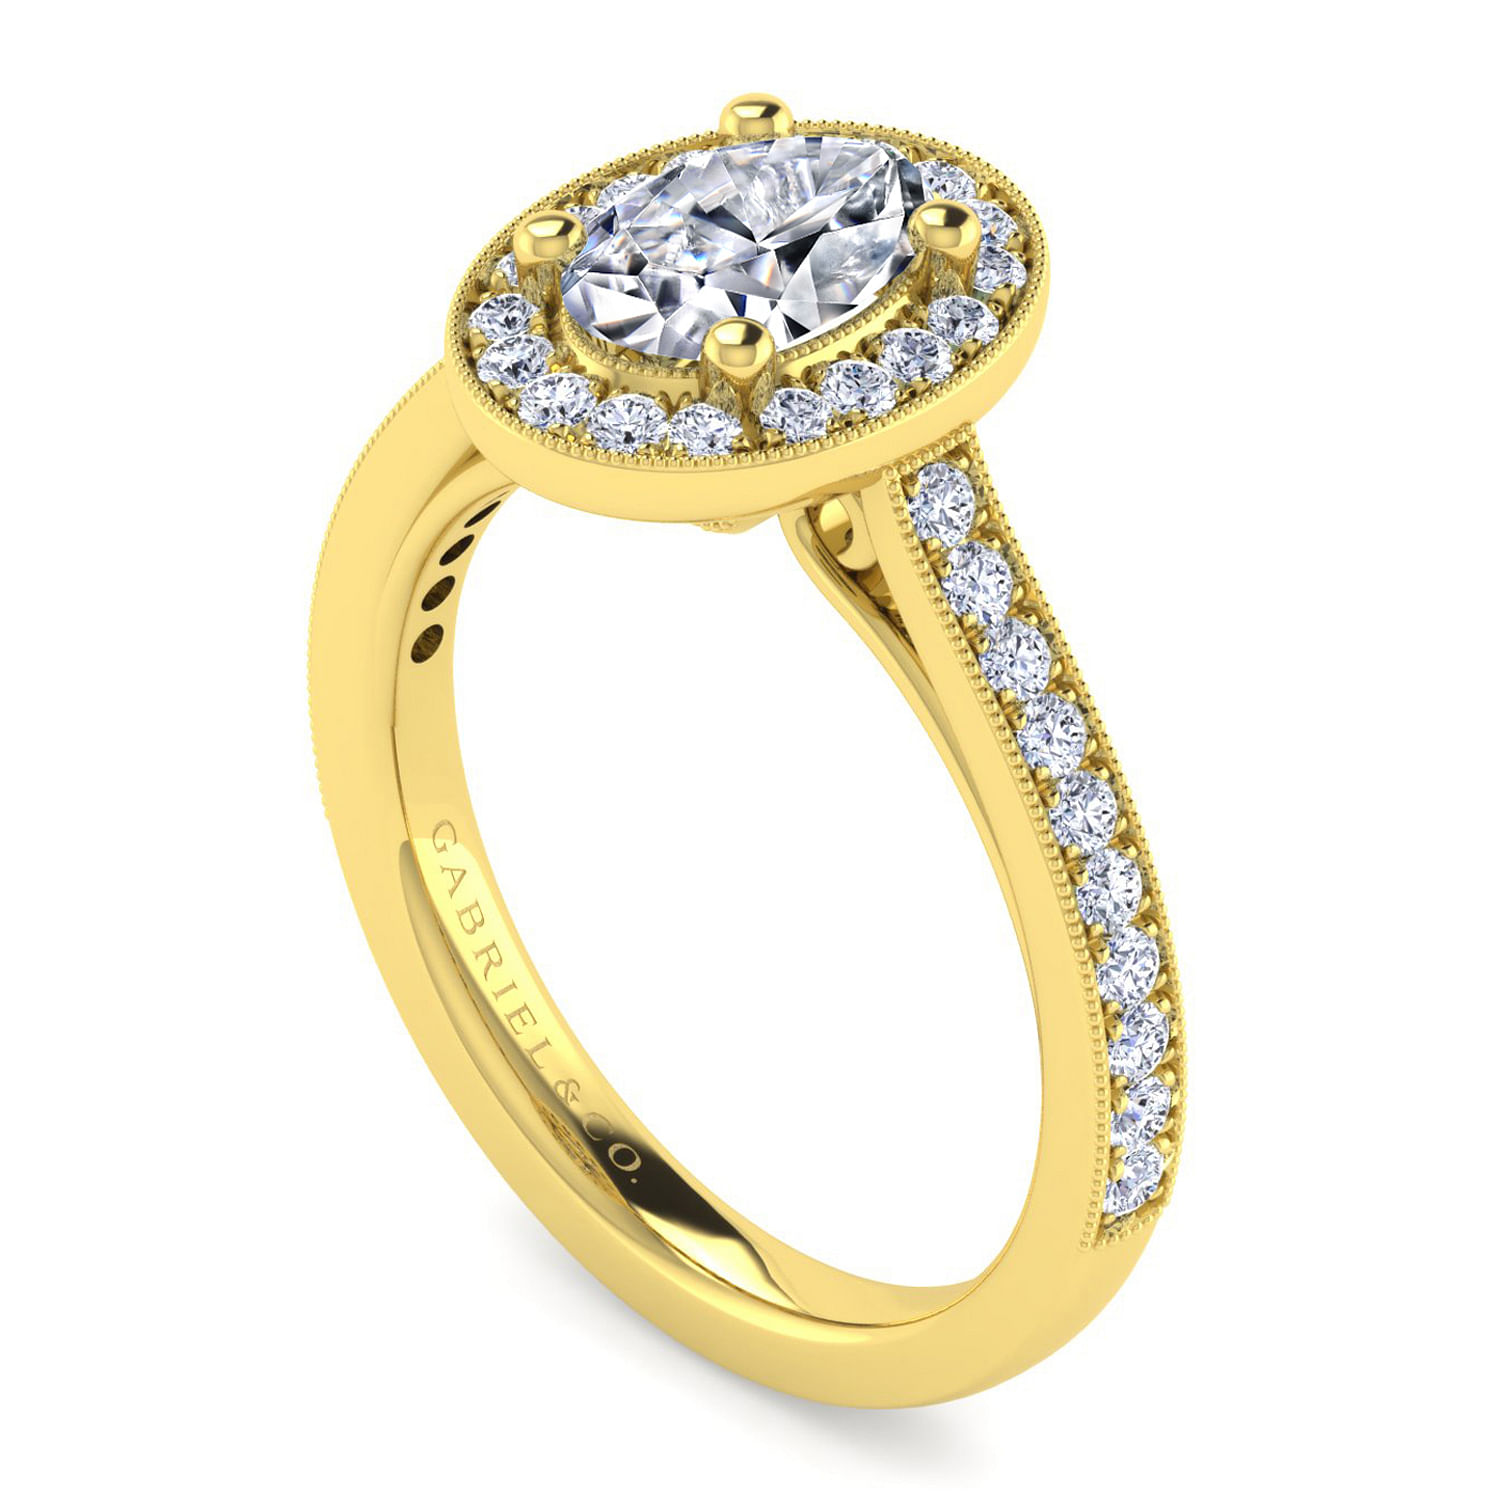 Vintage Inspired 14K Yellow Gold Oval Halo Diamond Engagement Ring